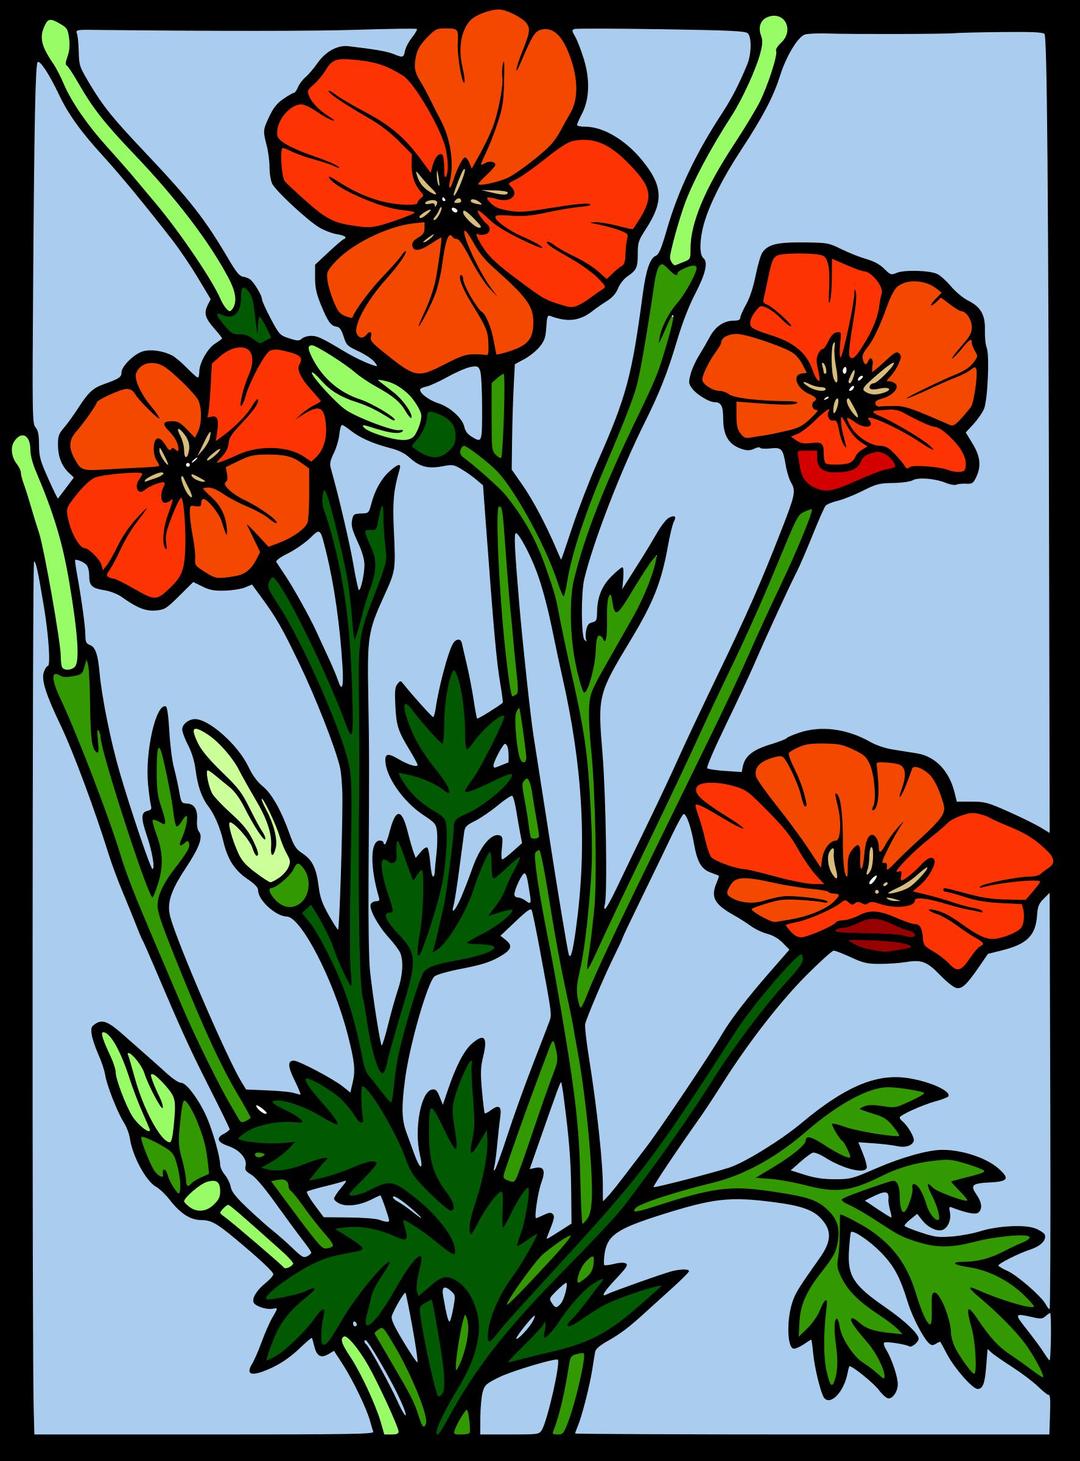 Coloured Poppy stained glass  png transparent